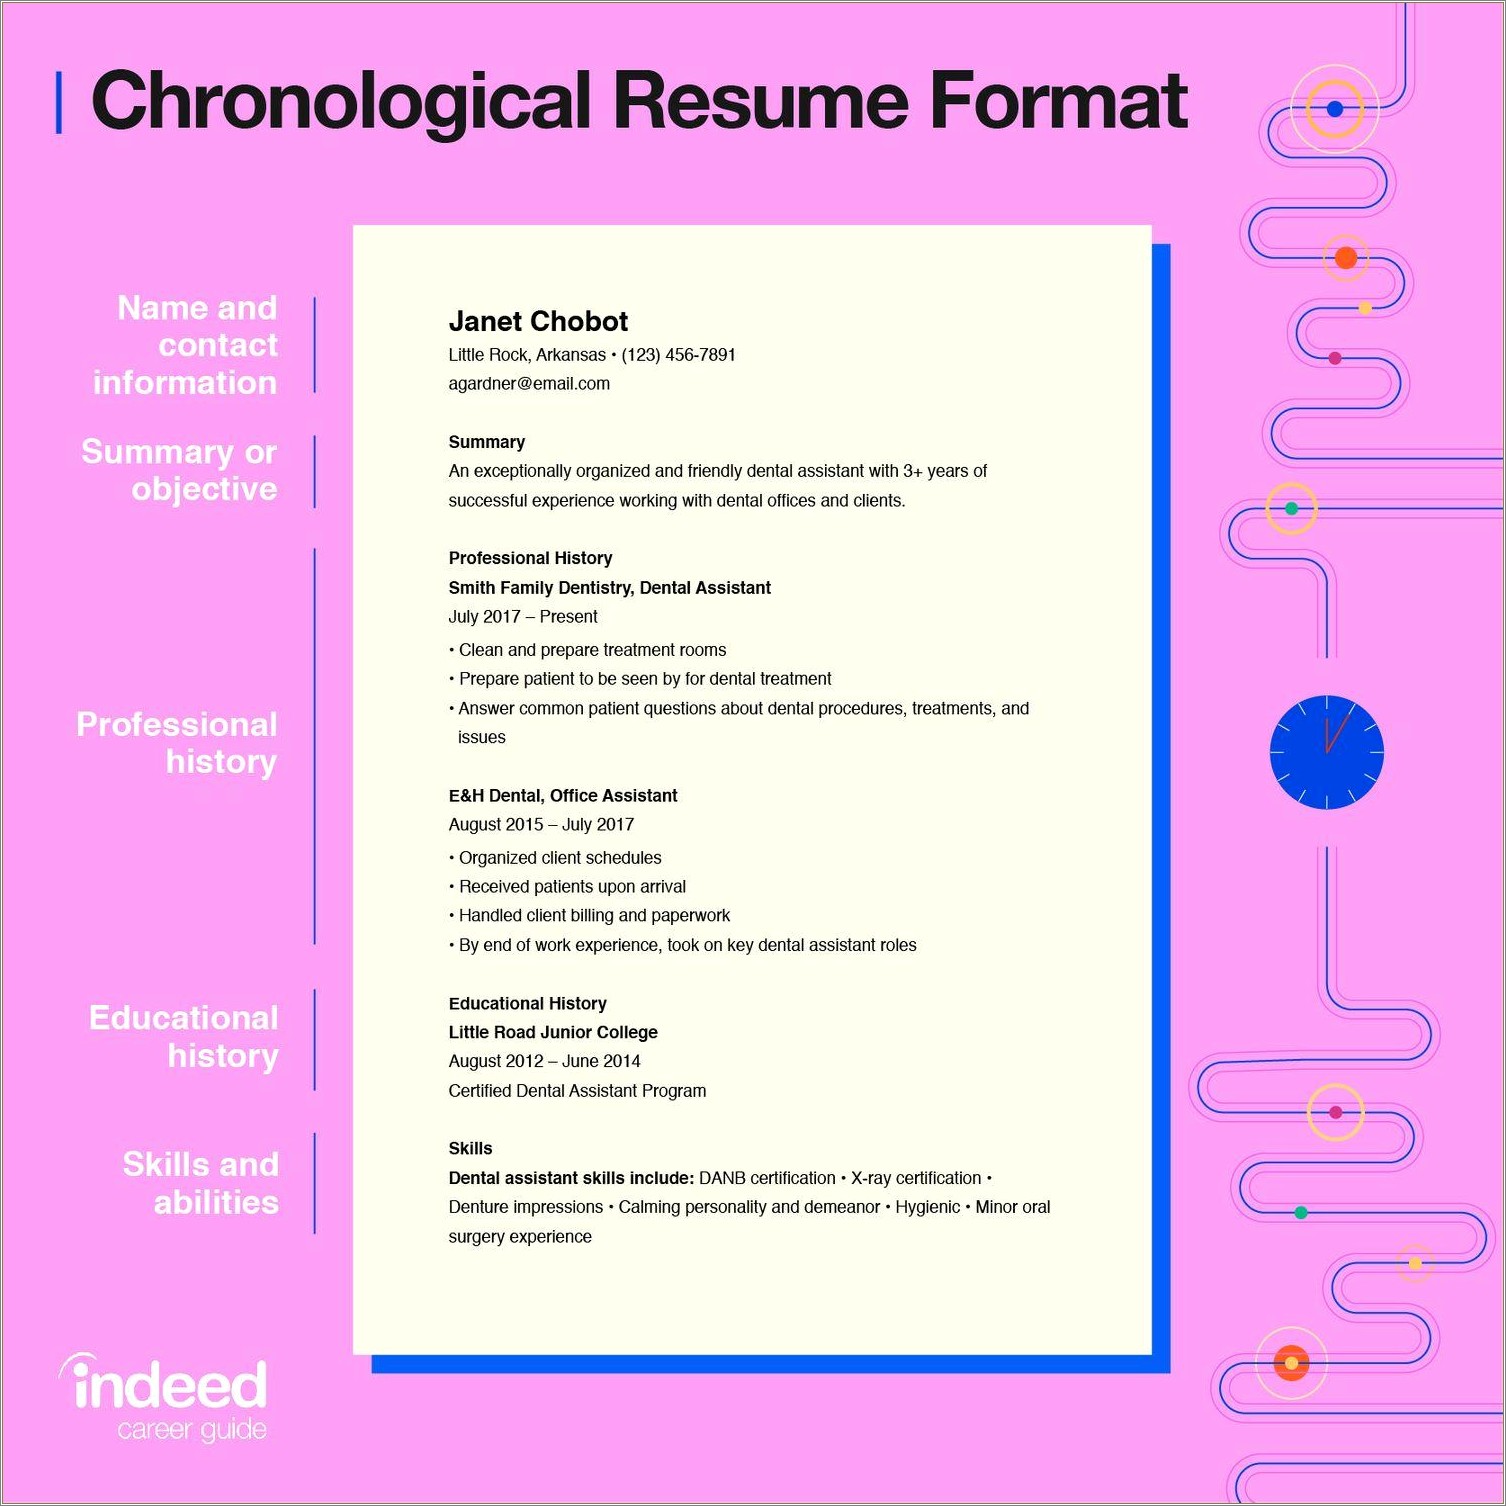 Importance Of Skills And Experience In A Resume